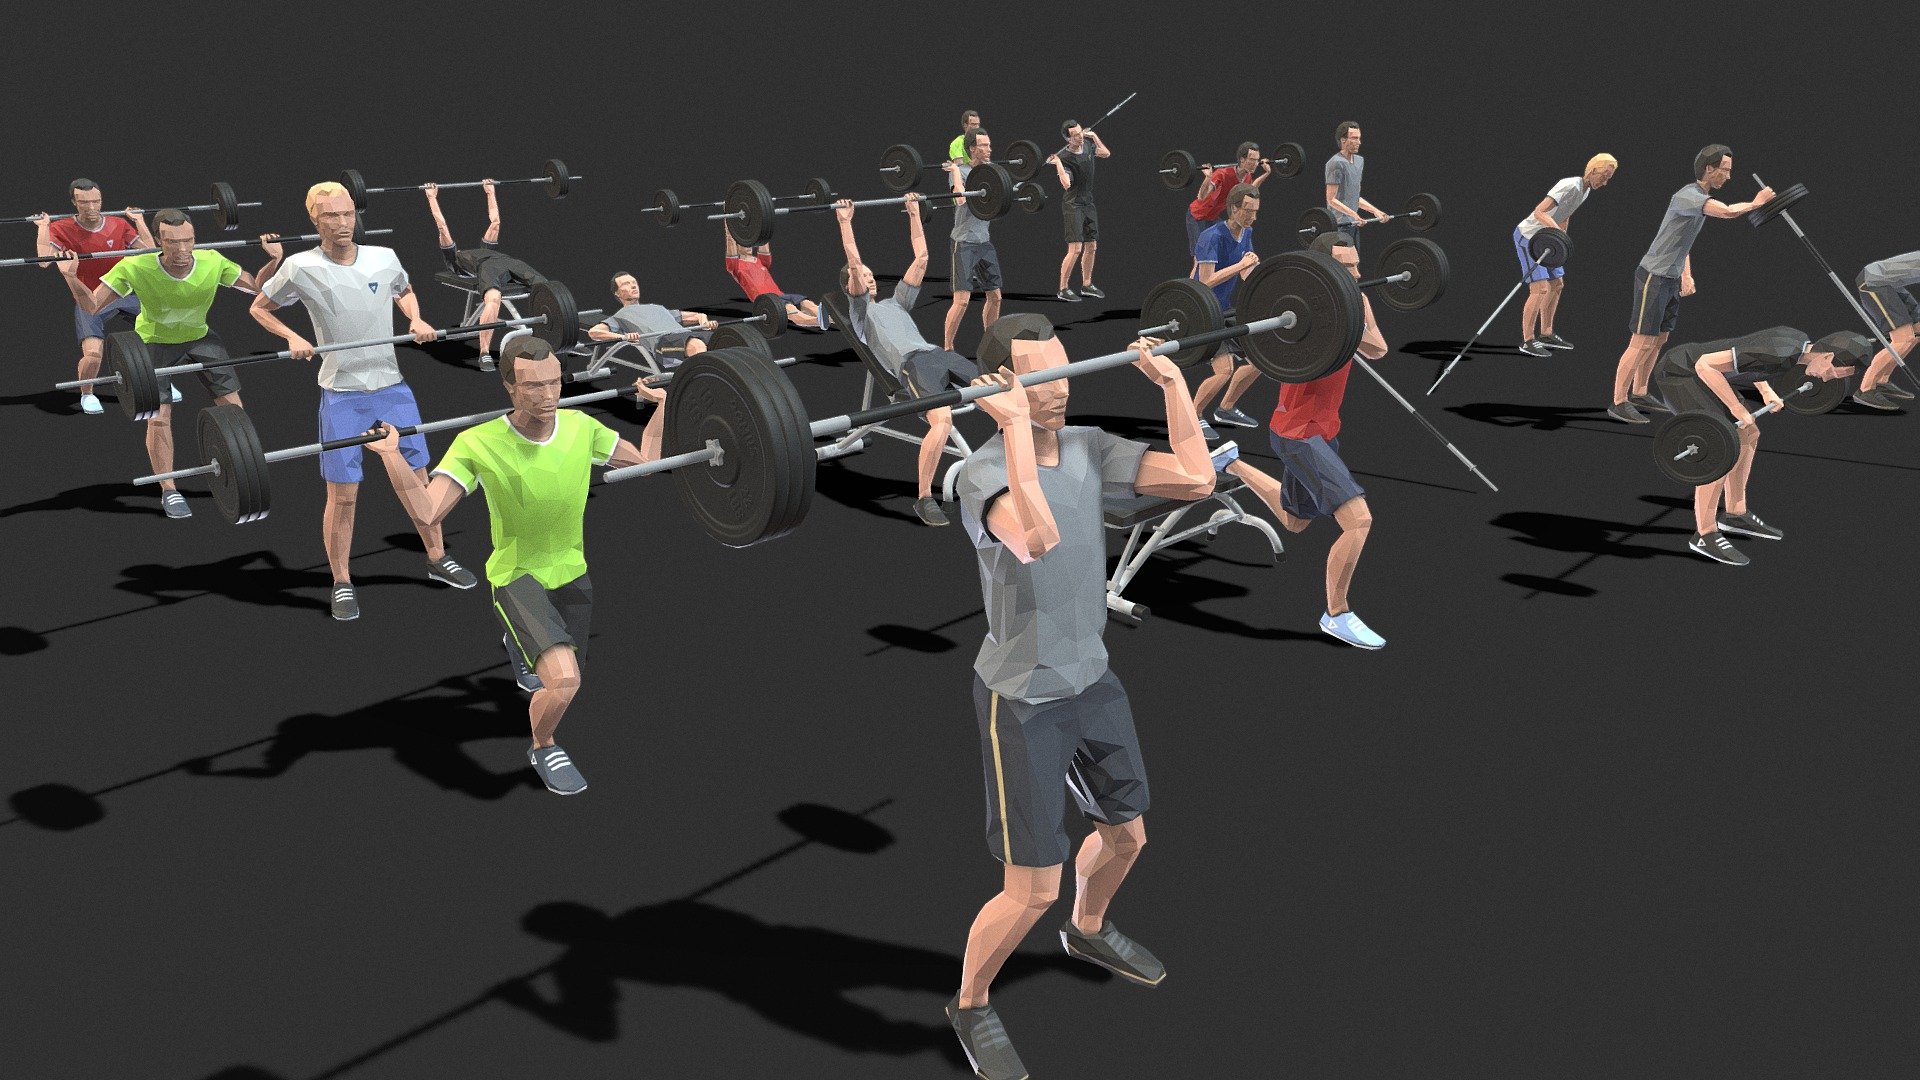 30 unique Barbells Worksou animations of exercise Man 
Low poly 3d model in flat surface style.
Animation created in CAT system.
All animations are exported to FBX files 3d model